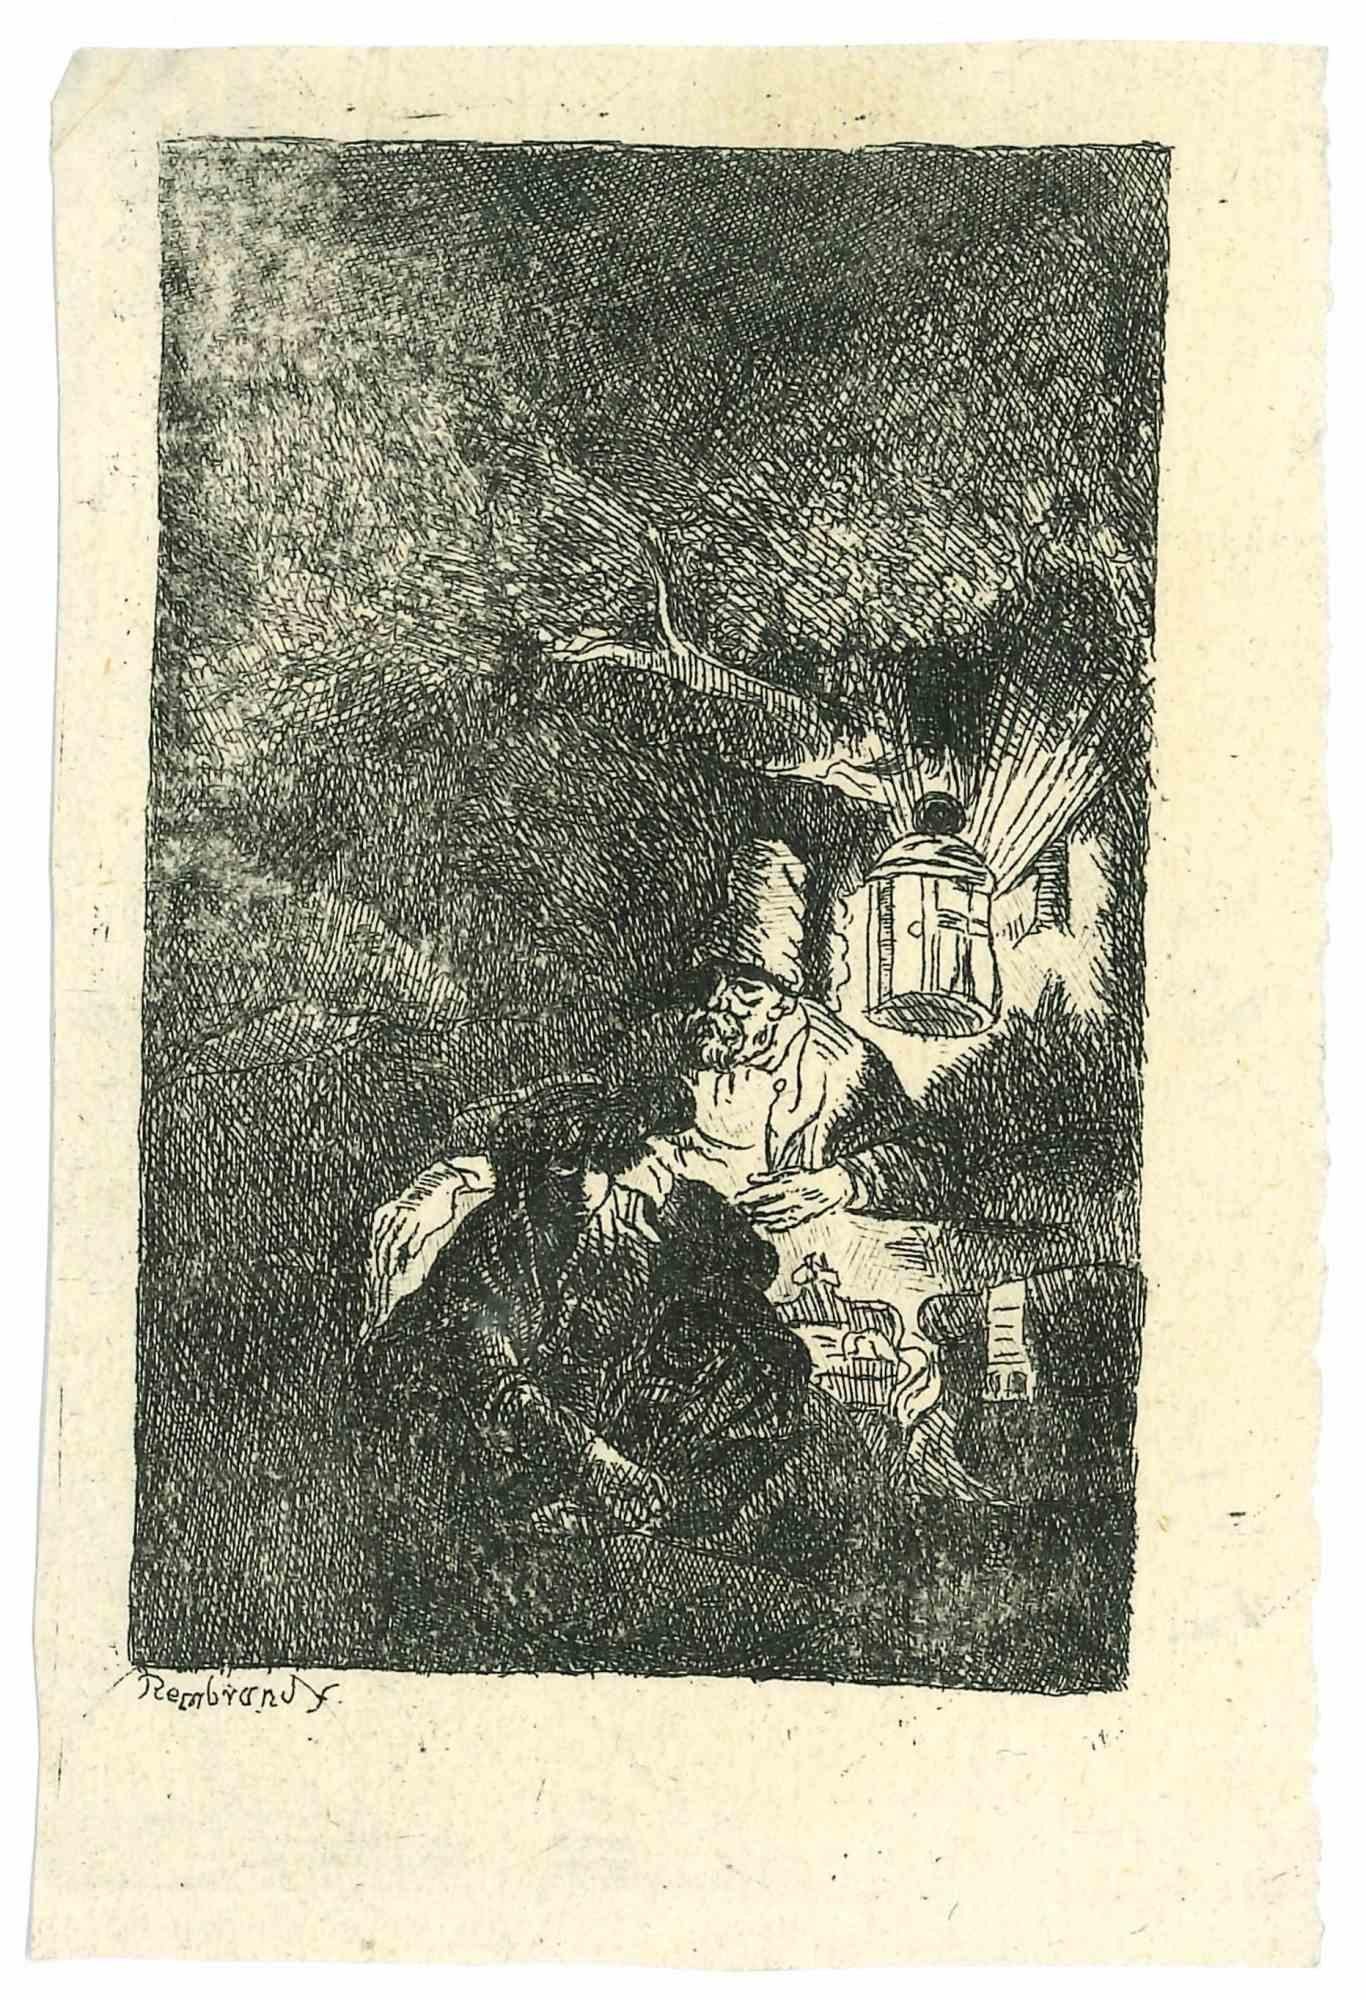 Charles Amand Durand Portrait Print - The Rest on the Flight into Egypt  - Engraving after Rembrandt - 19th Century